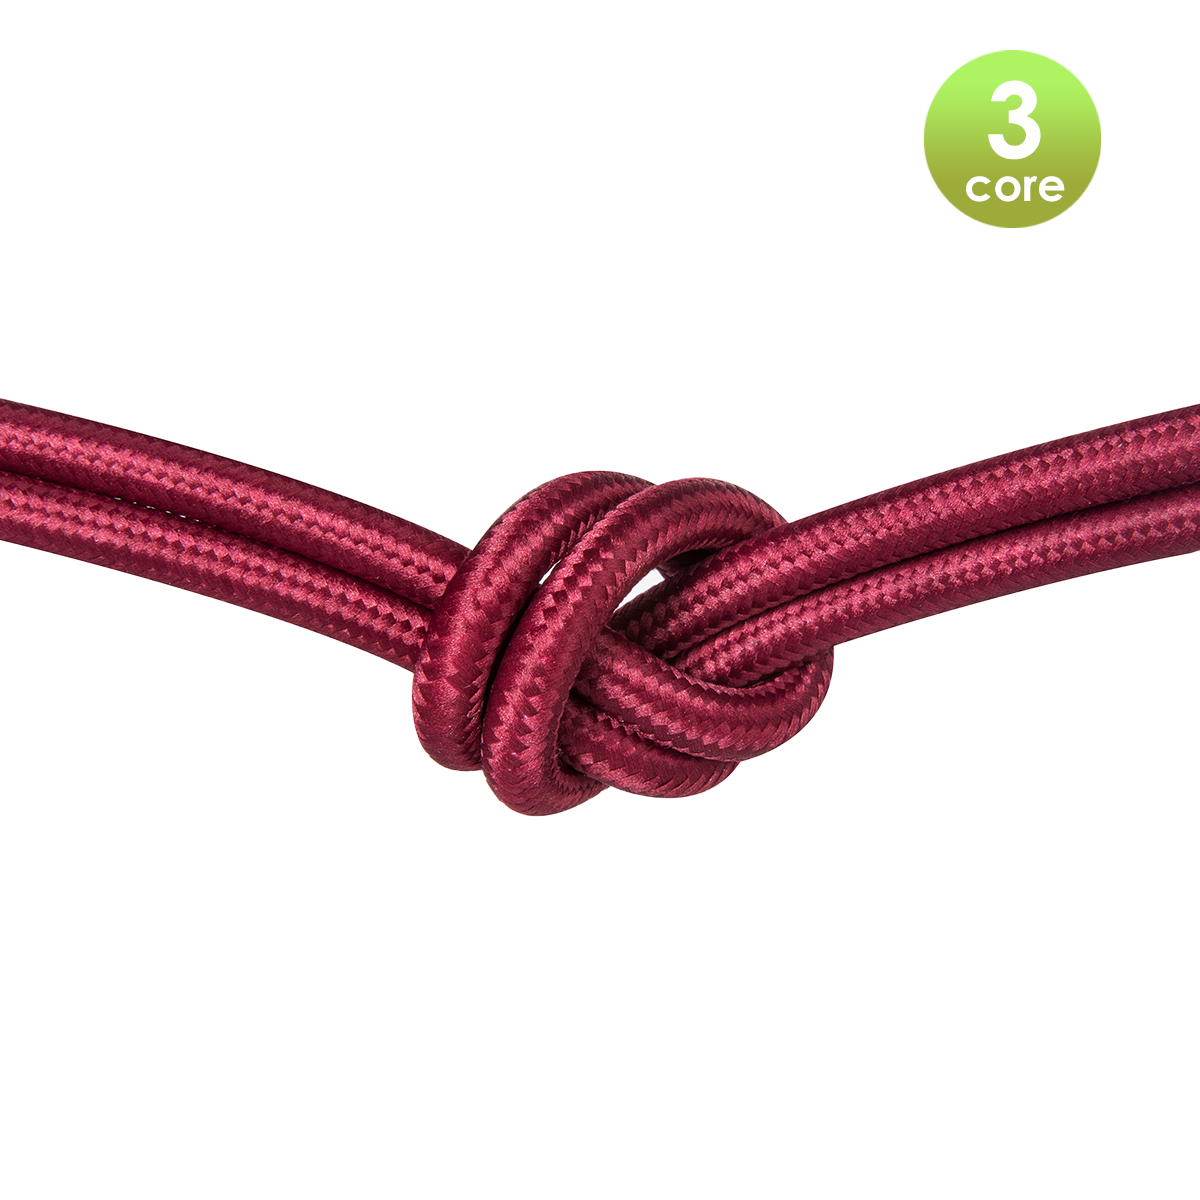 Tangla lighting - TLCB01009RD - 3c - Fabric cable 3 core - in antique ruby